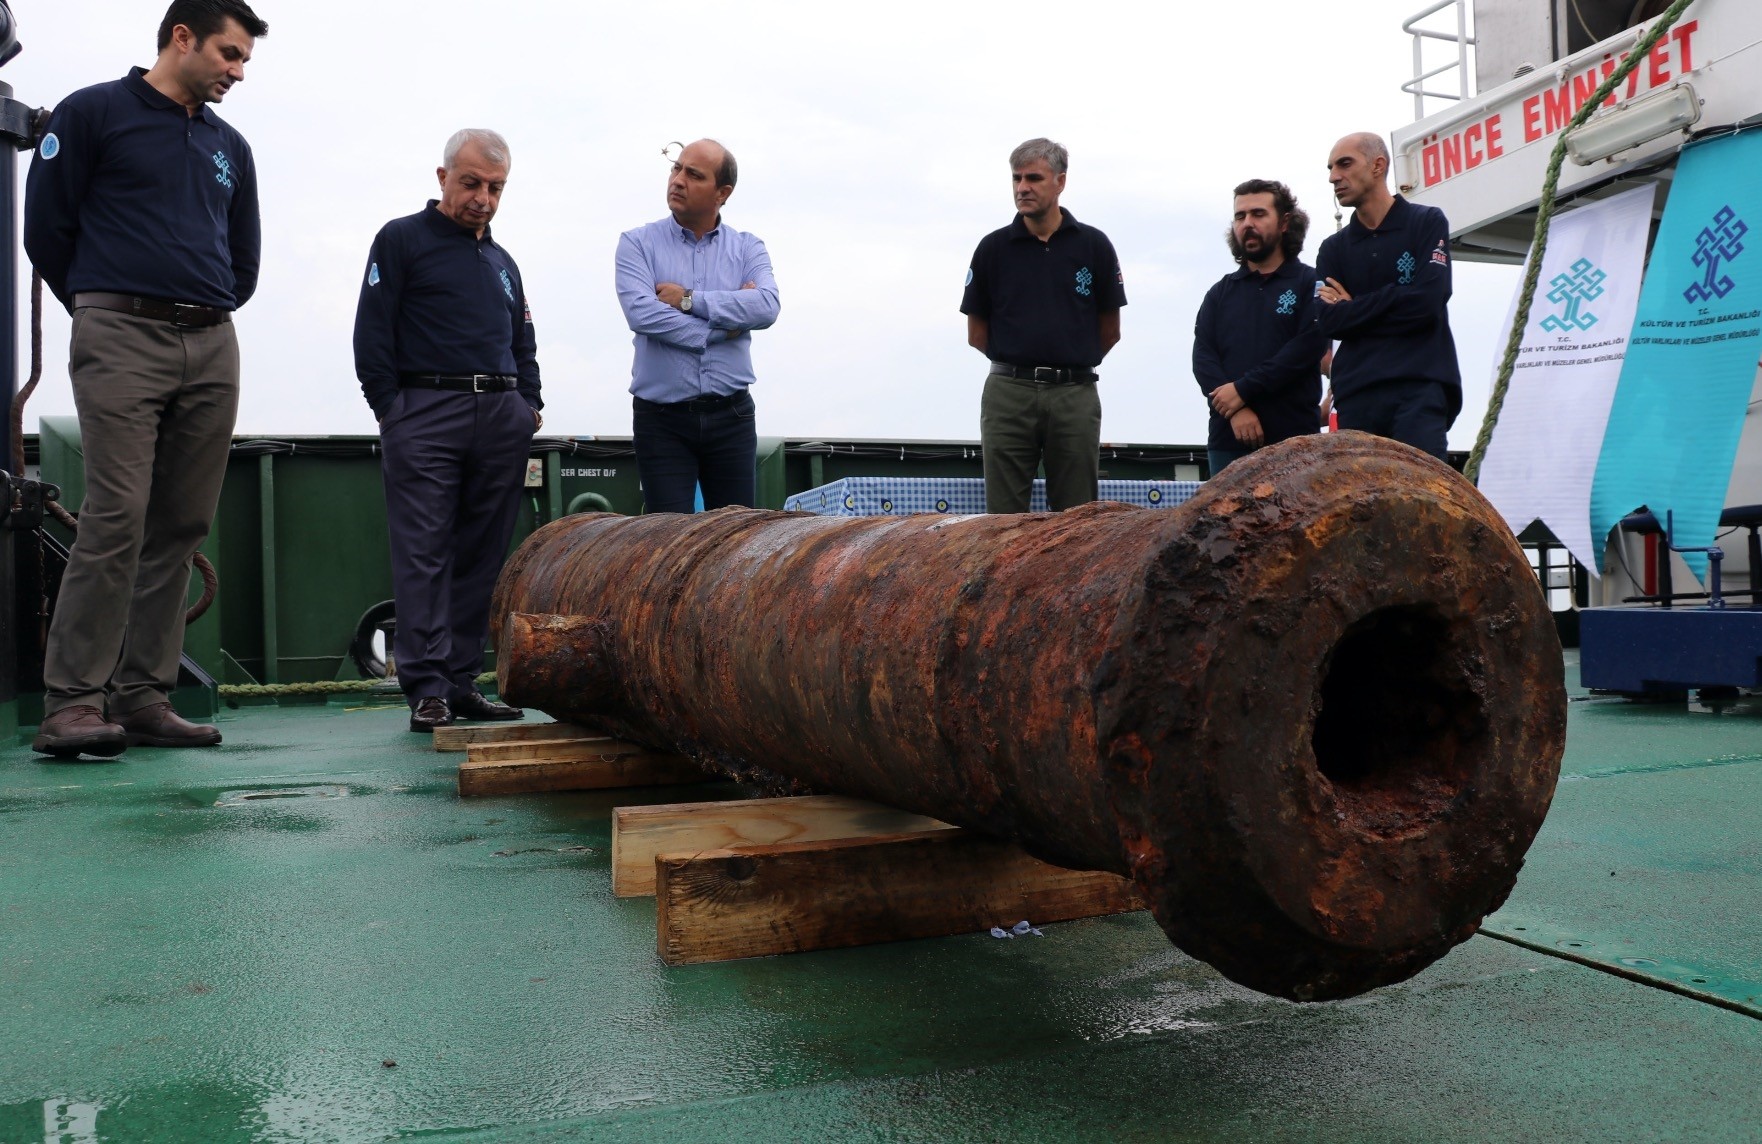 A 2.5-ton cannon was among the items found aboard the Russian vessel.